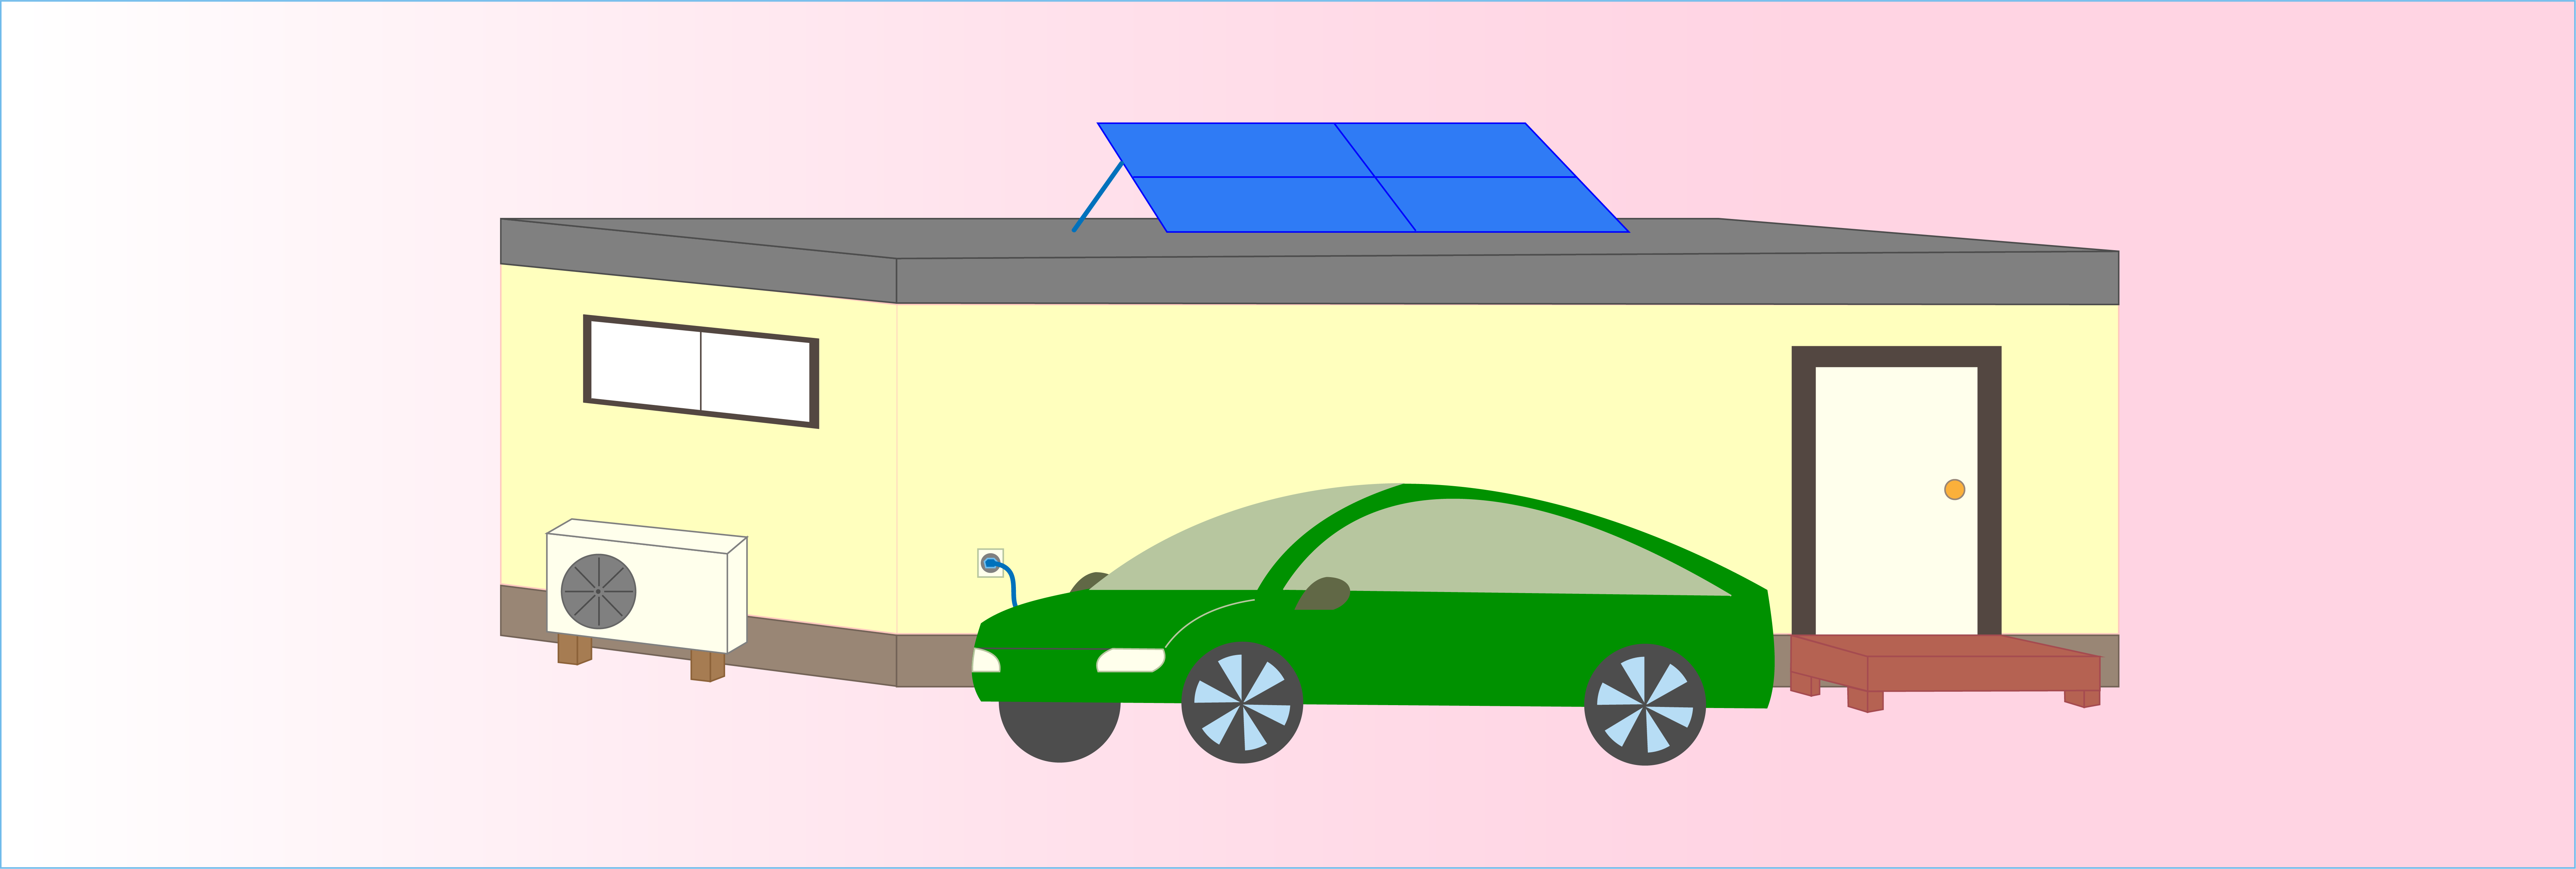 Graphic image of house with green car parked outside